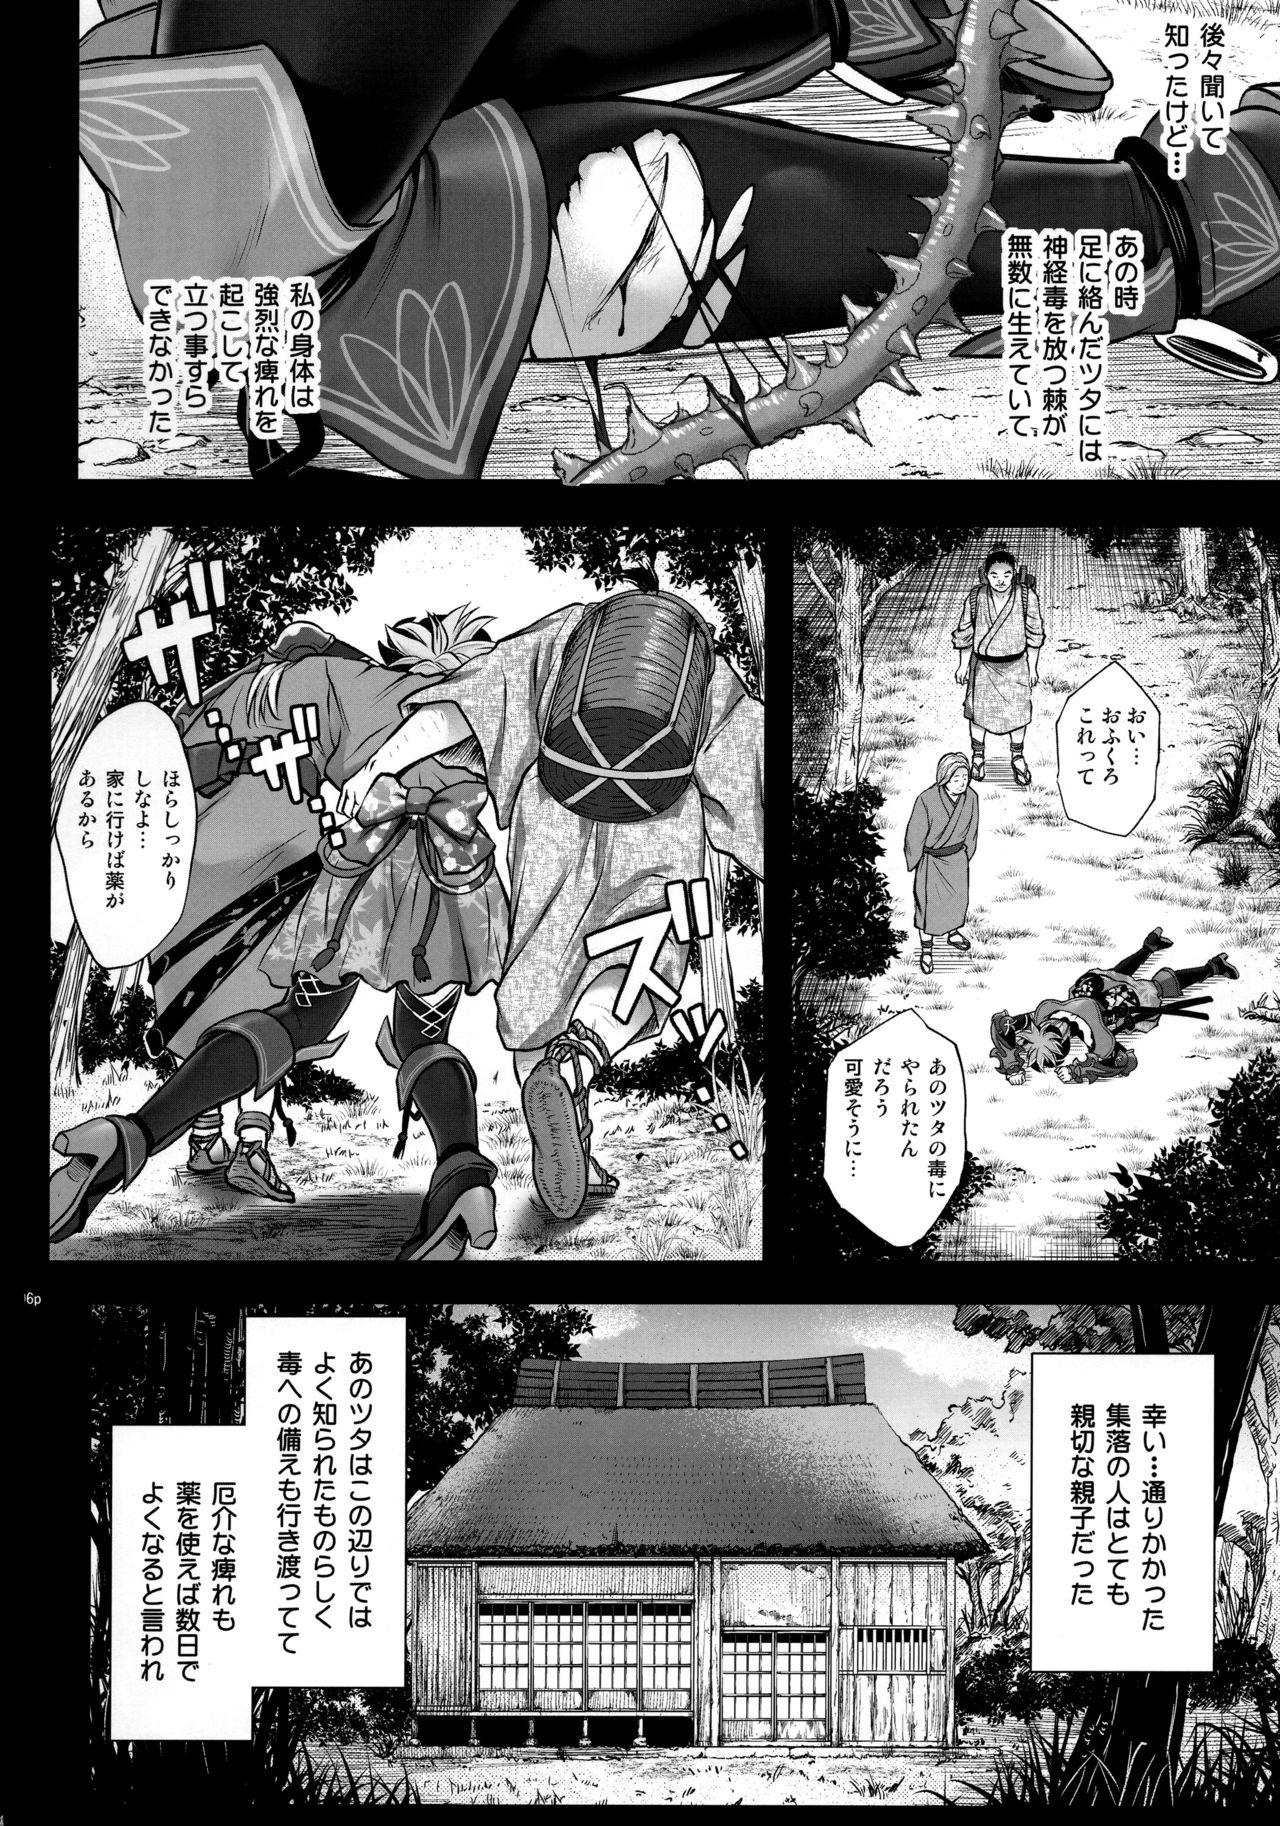 Fat T-32 hooollow - Fate grand order College - Page 6